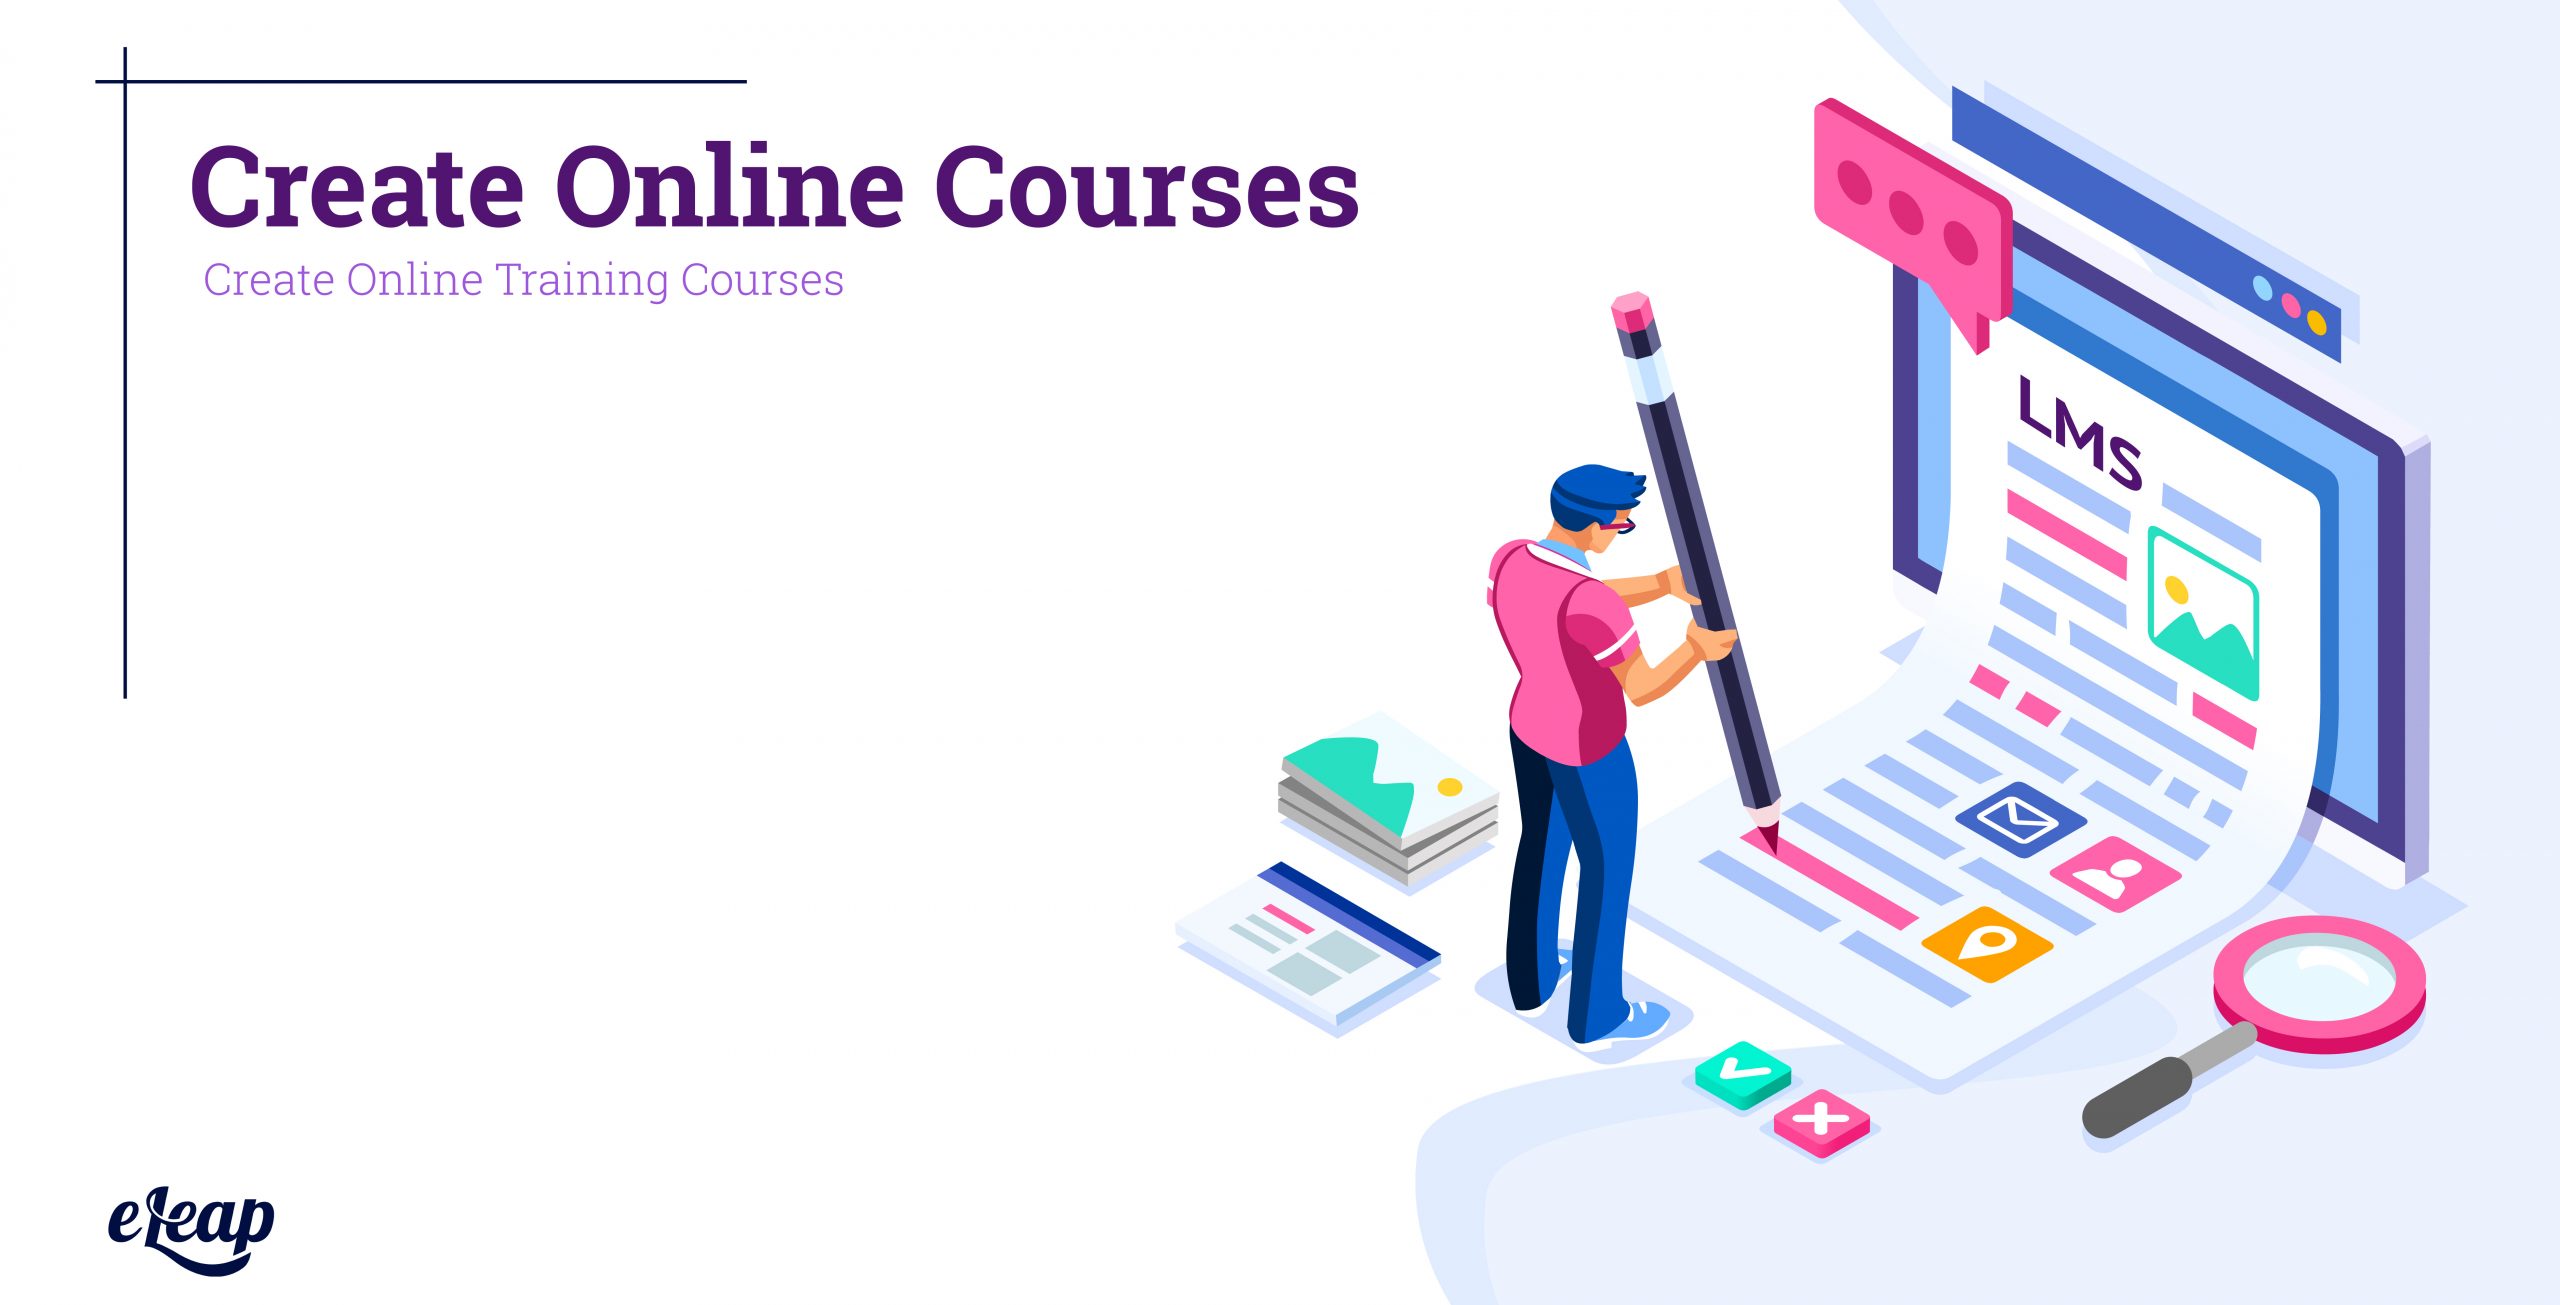 Create Online Courses | Quickly Create Online Training Courses